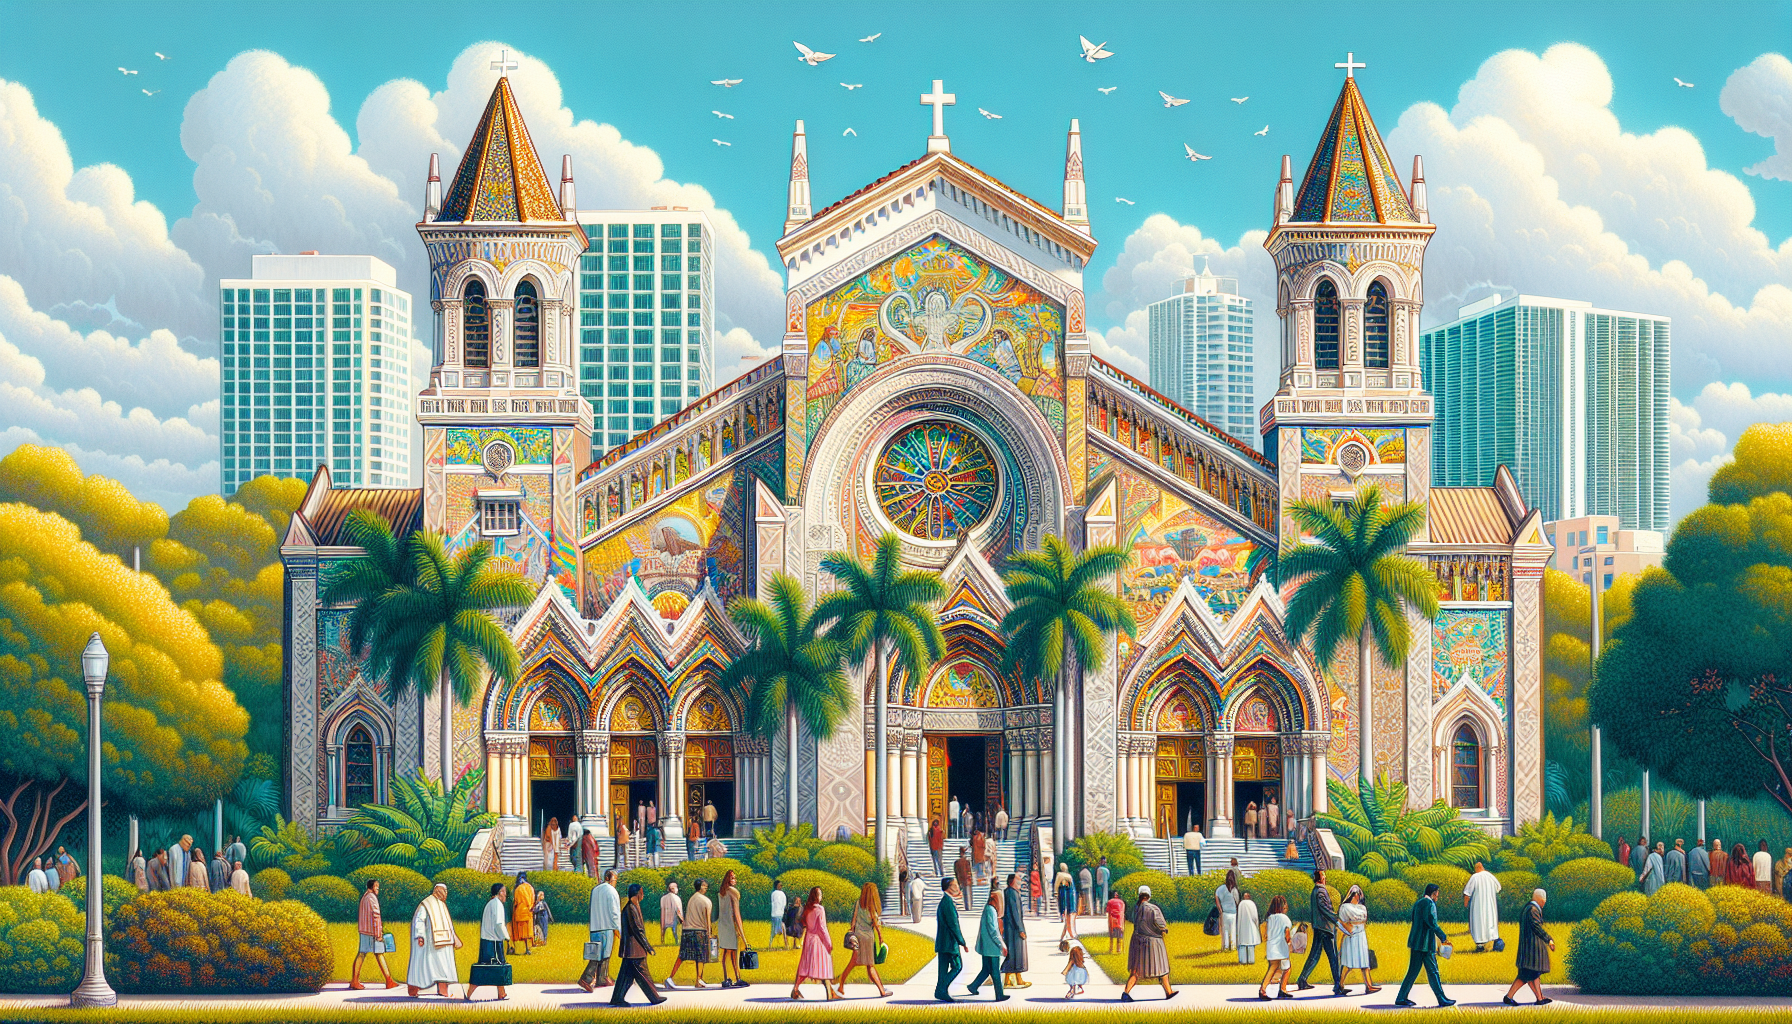 Create an image of some of the most beautiful and iconic Christian churches in Miami. Show the stunning architecture of these churches with intricate details, surrounded by lush greenery and bright su